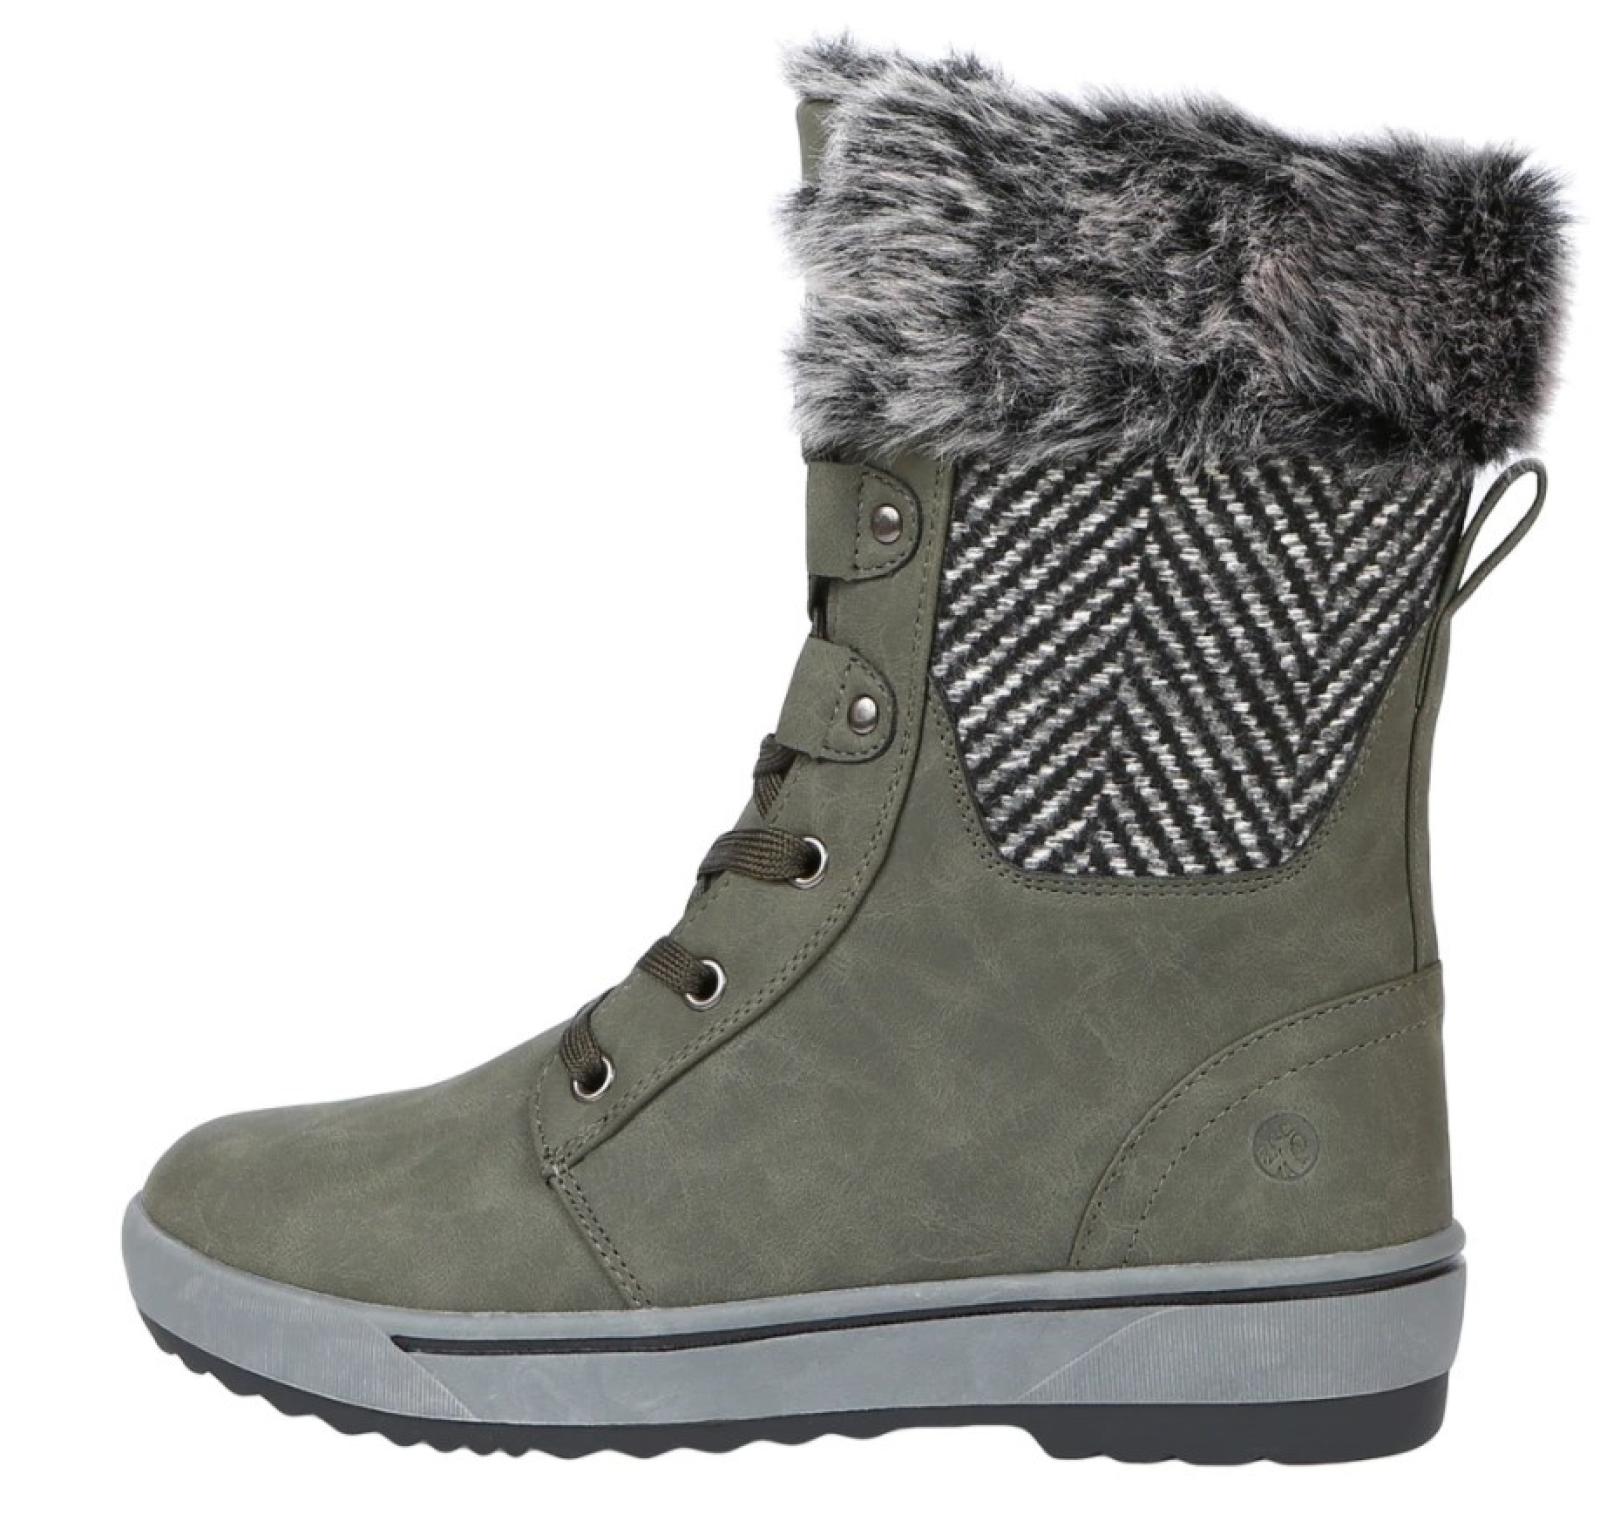 Northside Women's Brookelle SE Cold Weather Fashion Boot